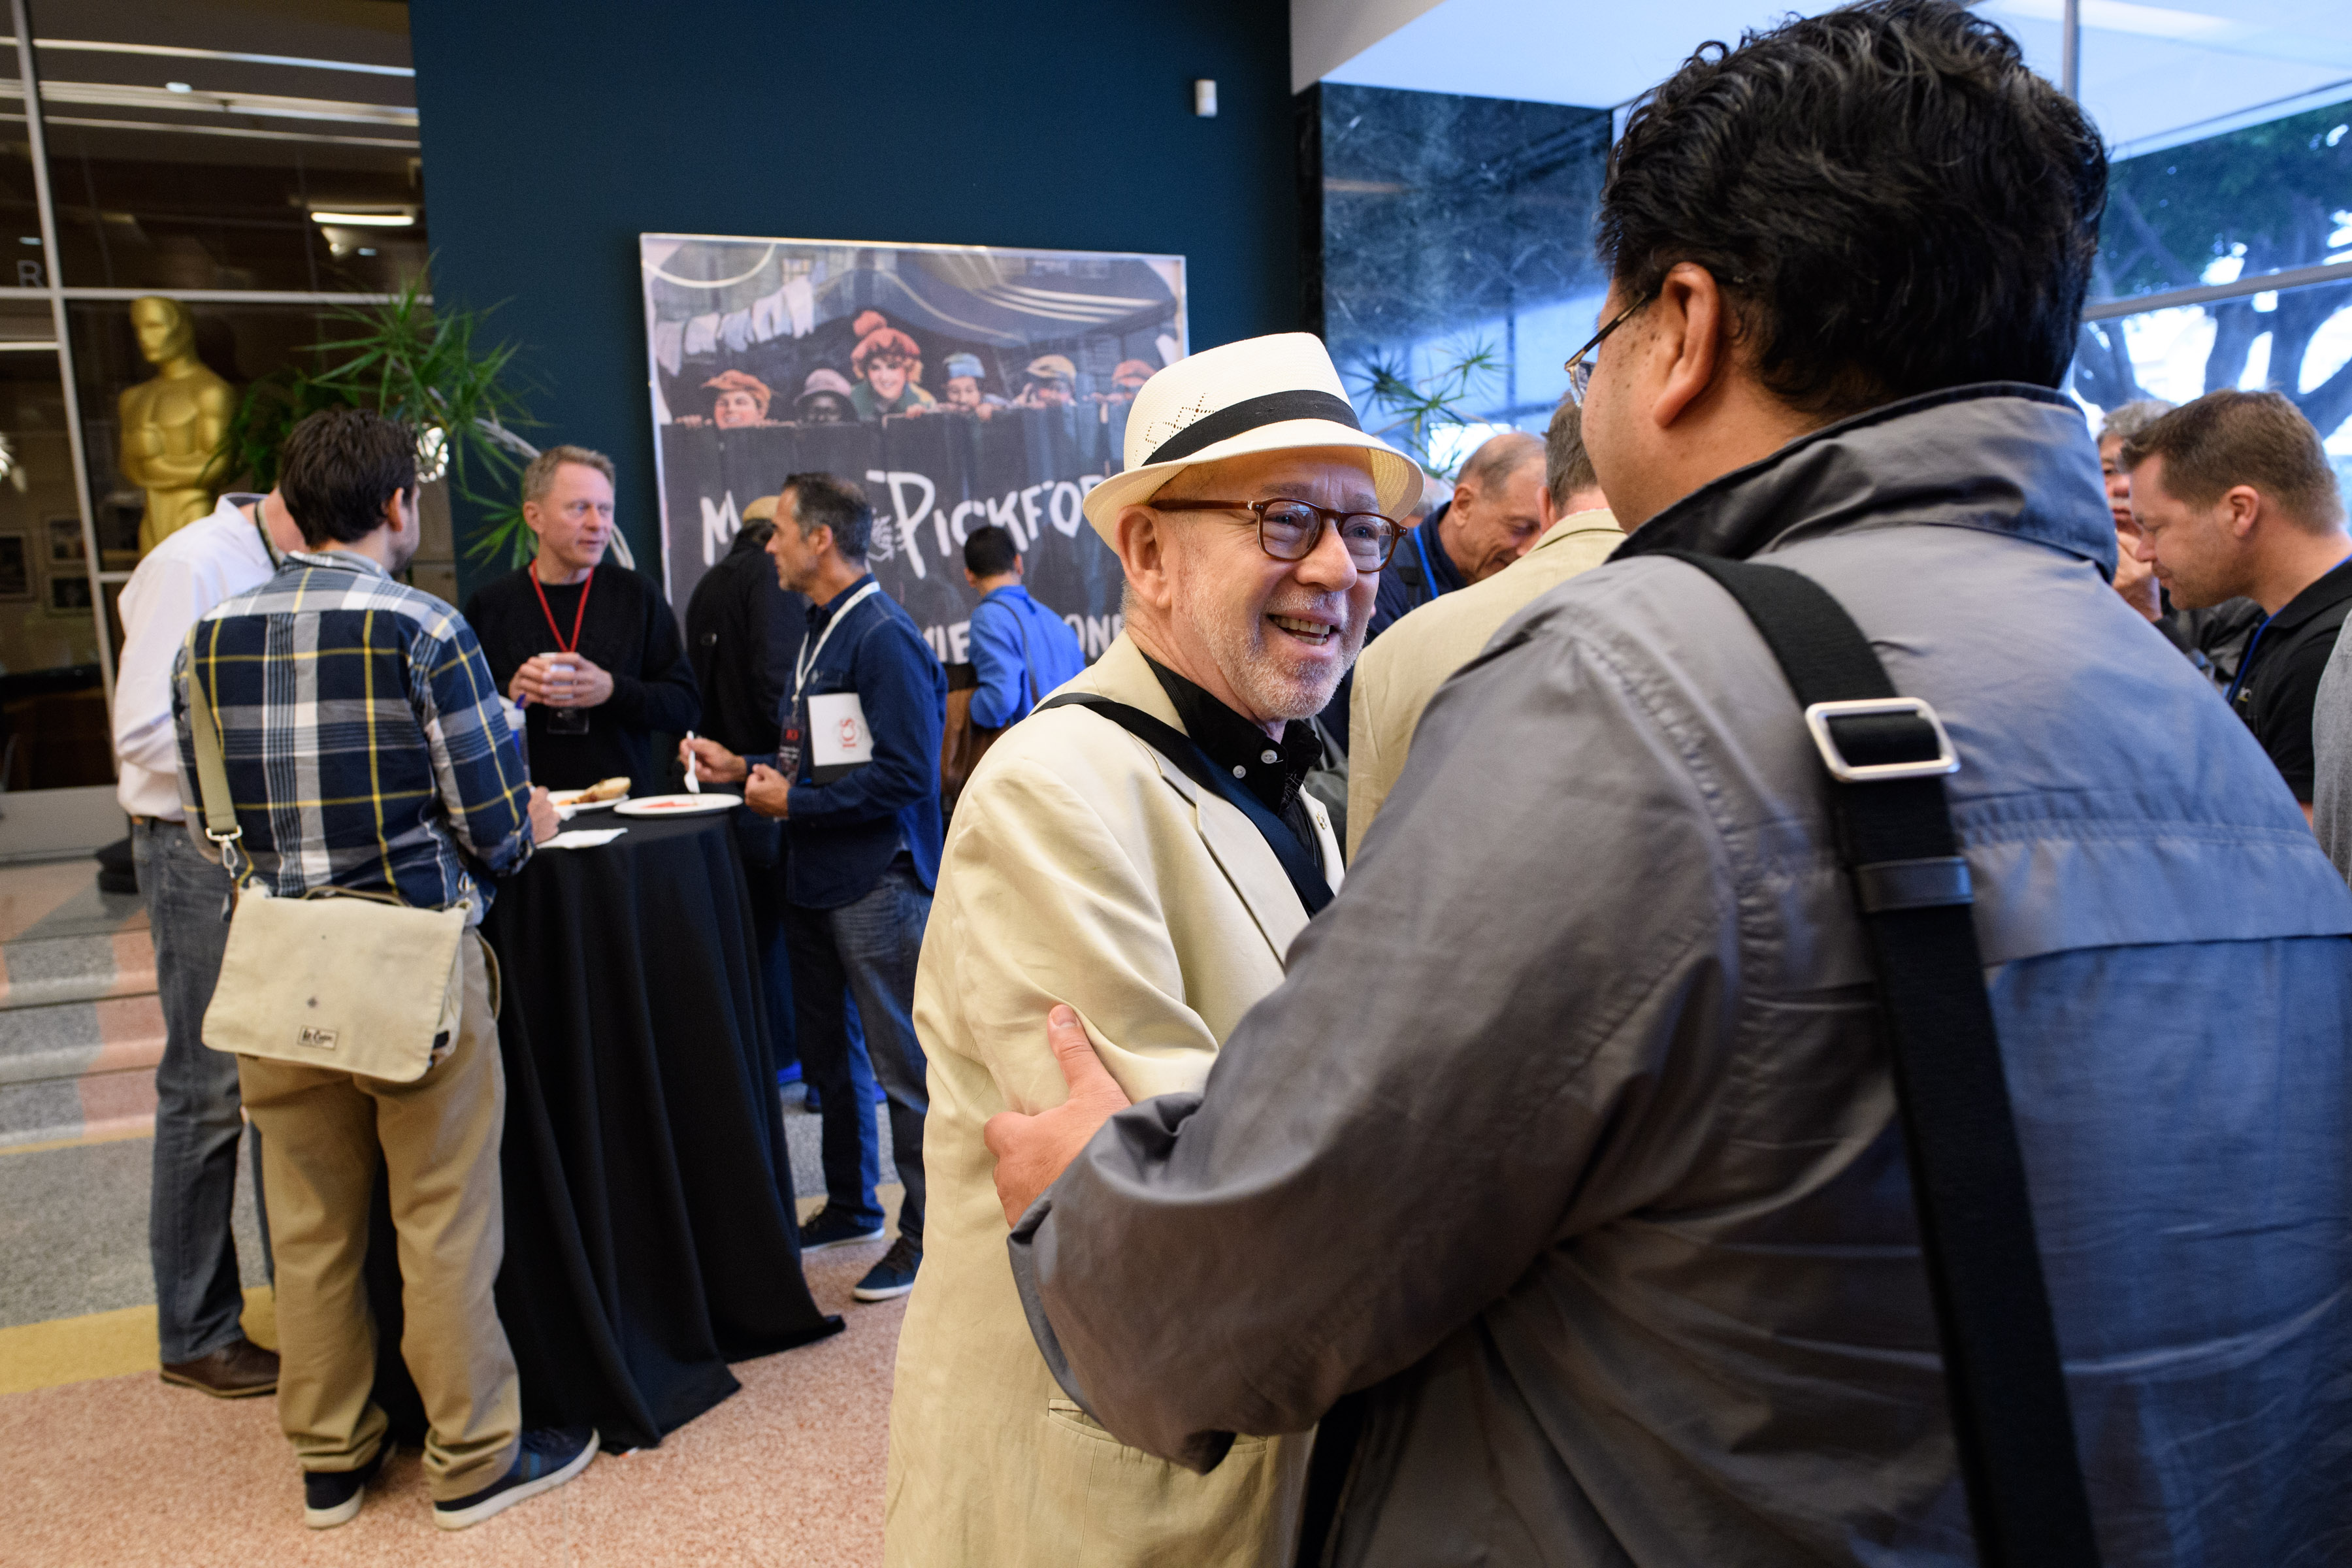 Steven B. Poster, ASC — president of IATSE Local 600, the International Cinematographers Guild — greets a fellow ICS attendee at the Pickford Center. Photo courtesy of the Academy of Motion Picture Arts and Sciences